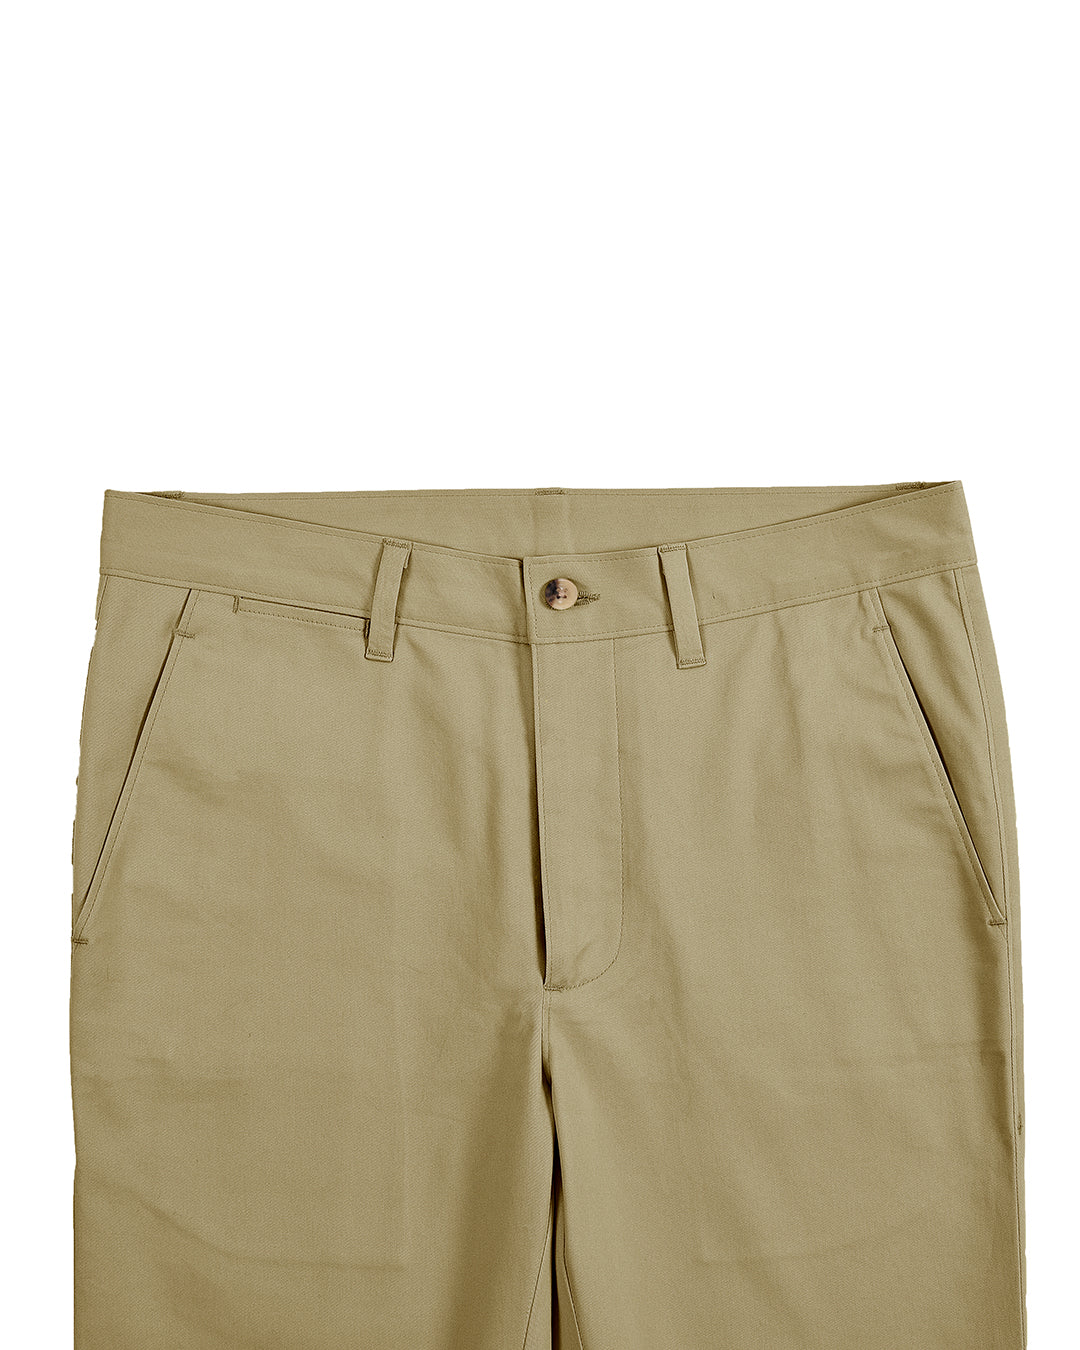 Front profile view of custom Genoa Chino pants for men by Luxire in khaki